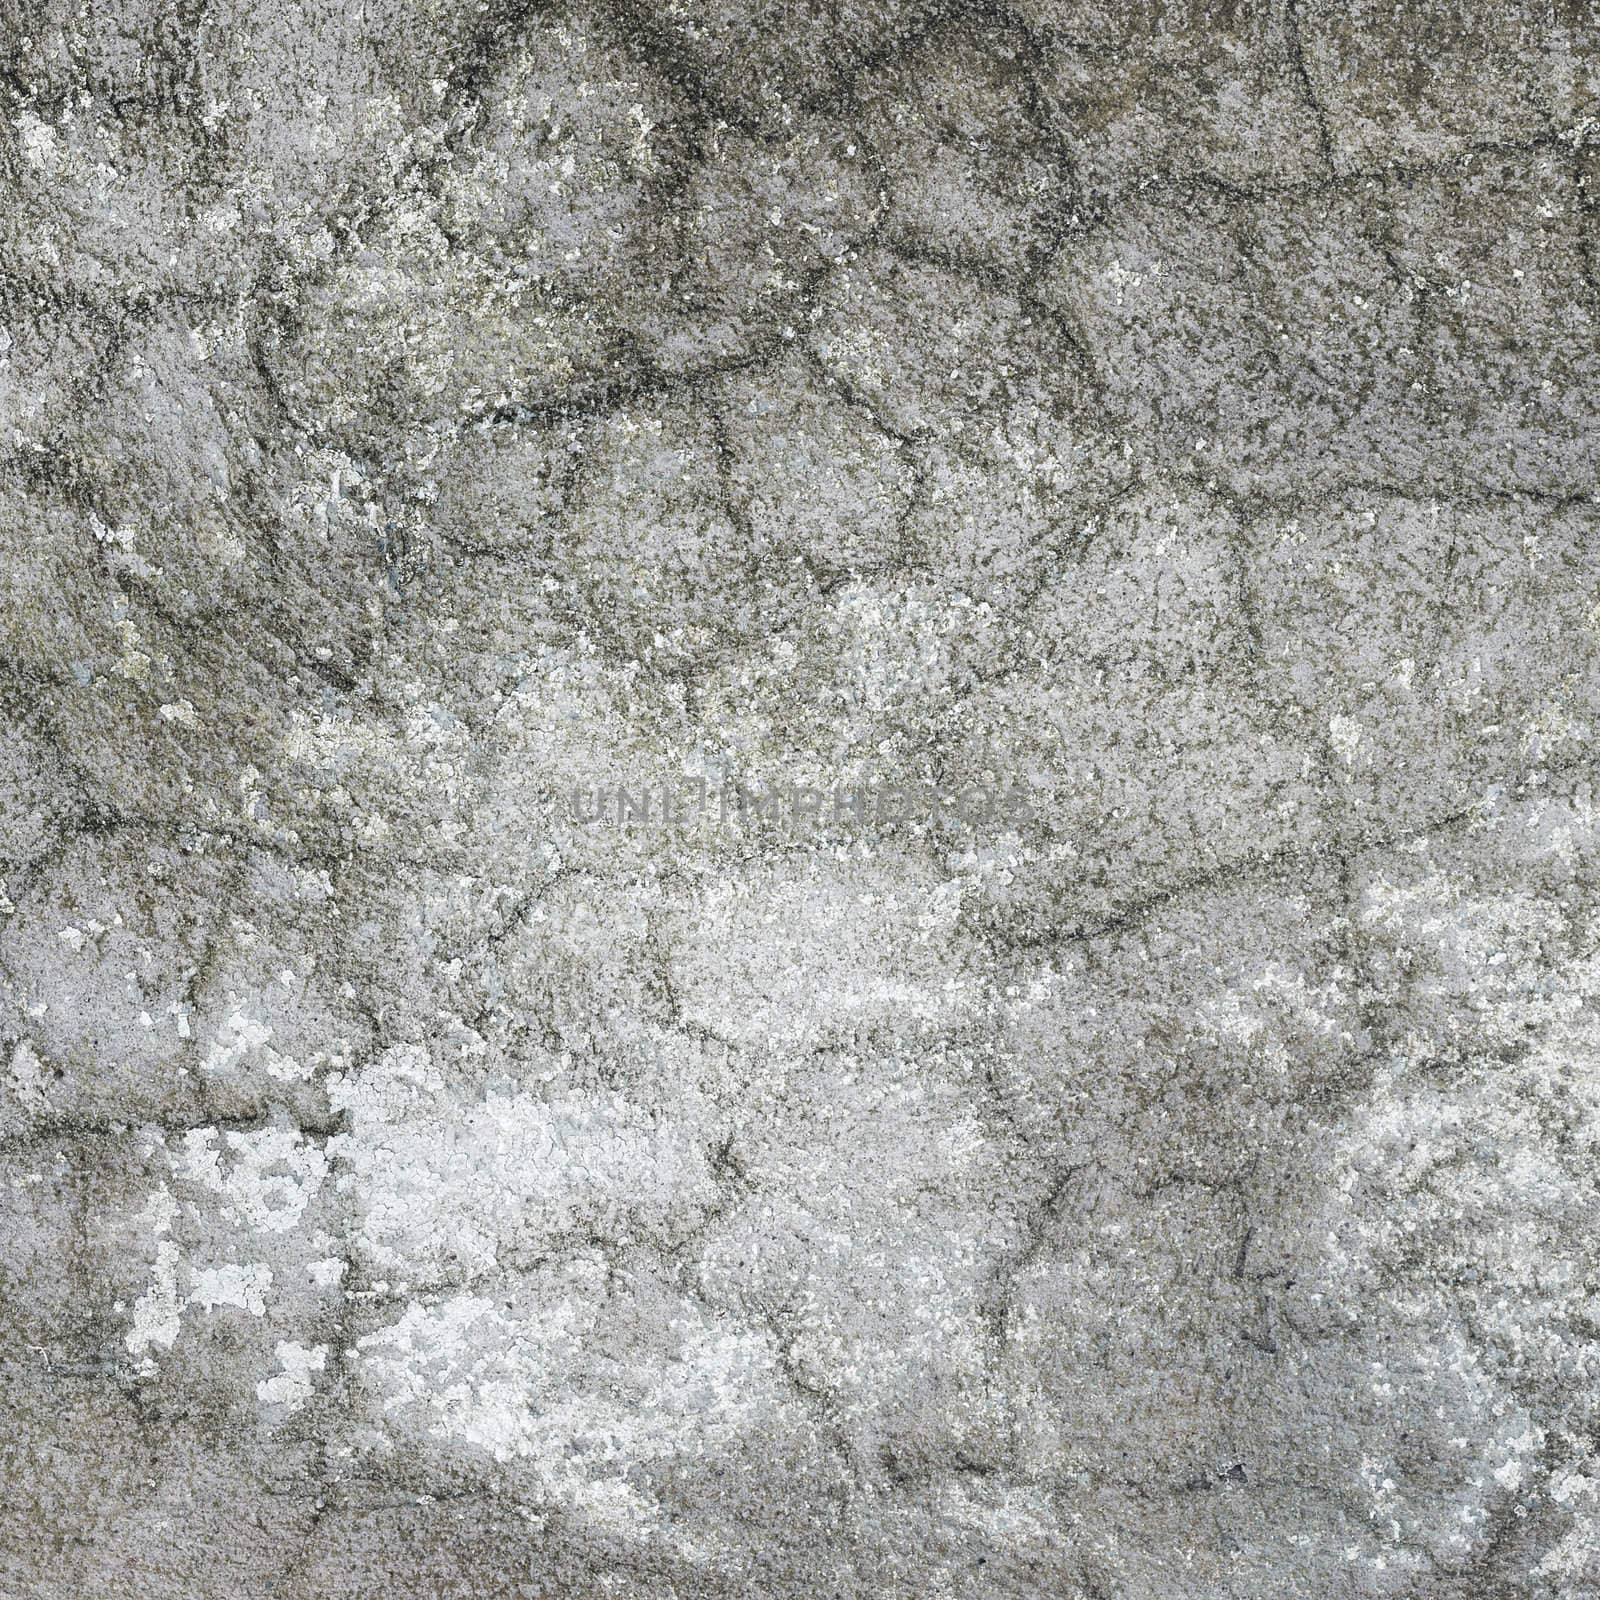 Square structure of gray rough plaster with cracks